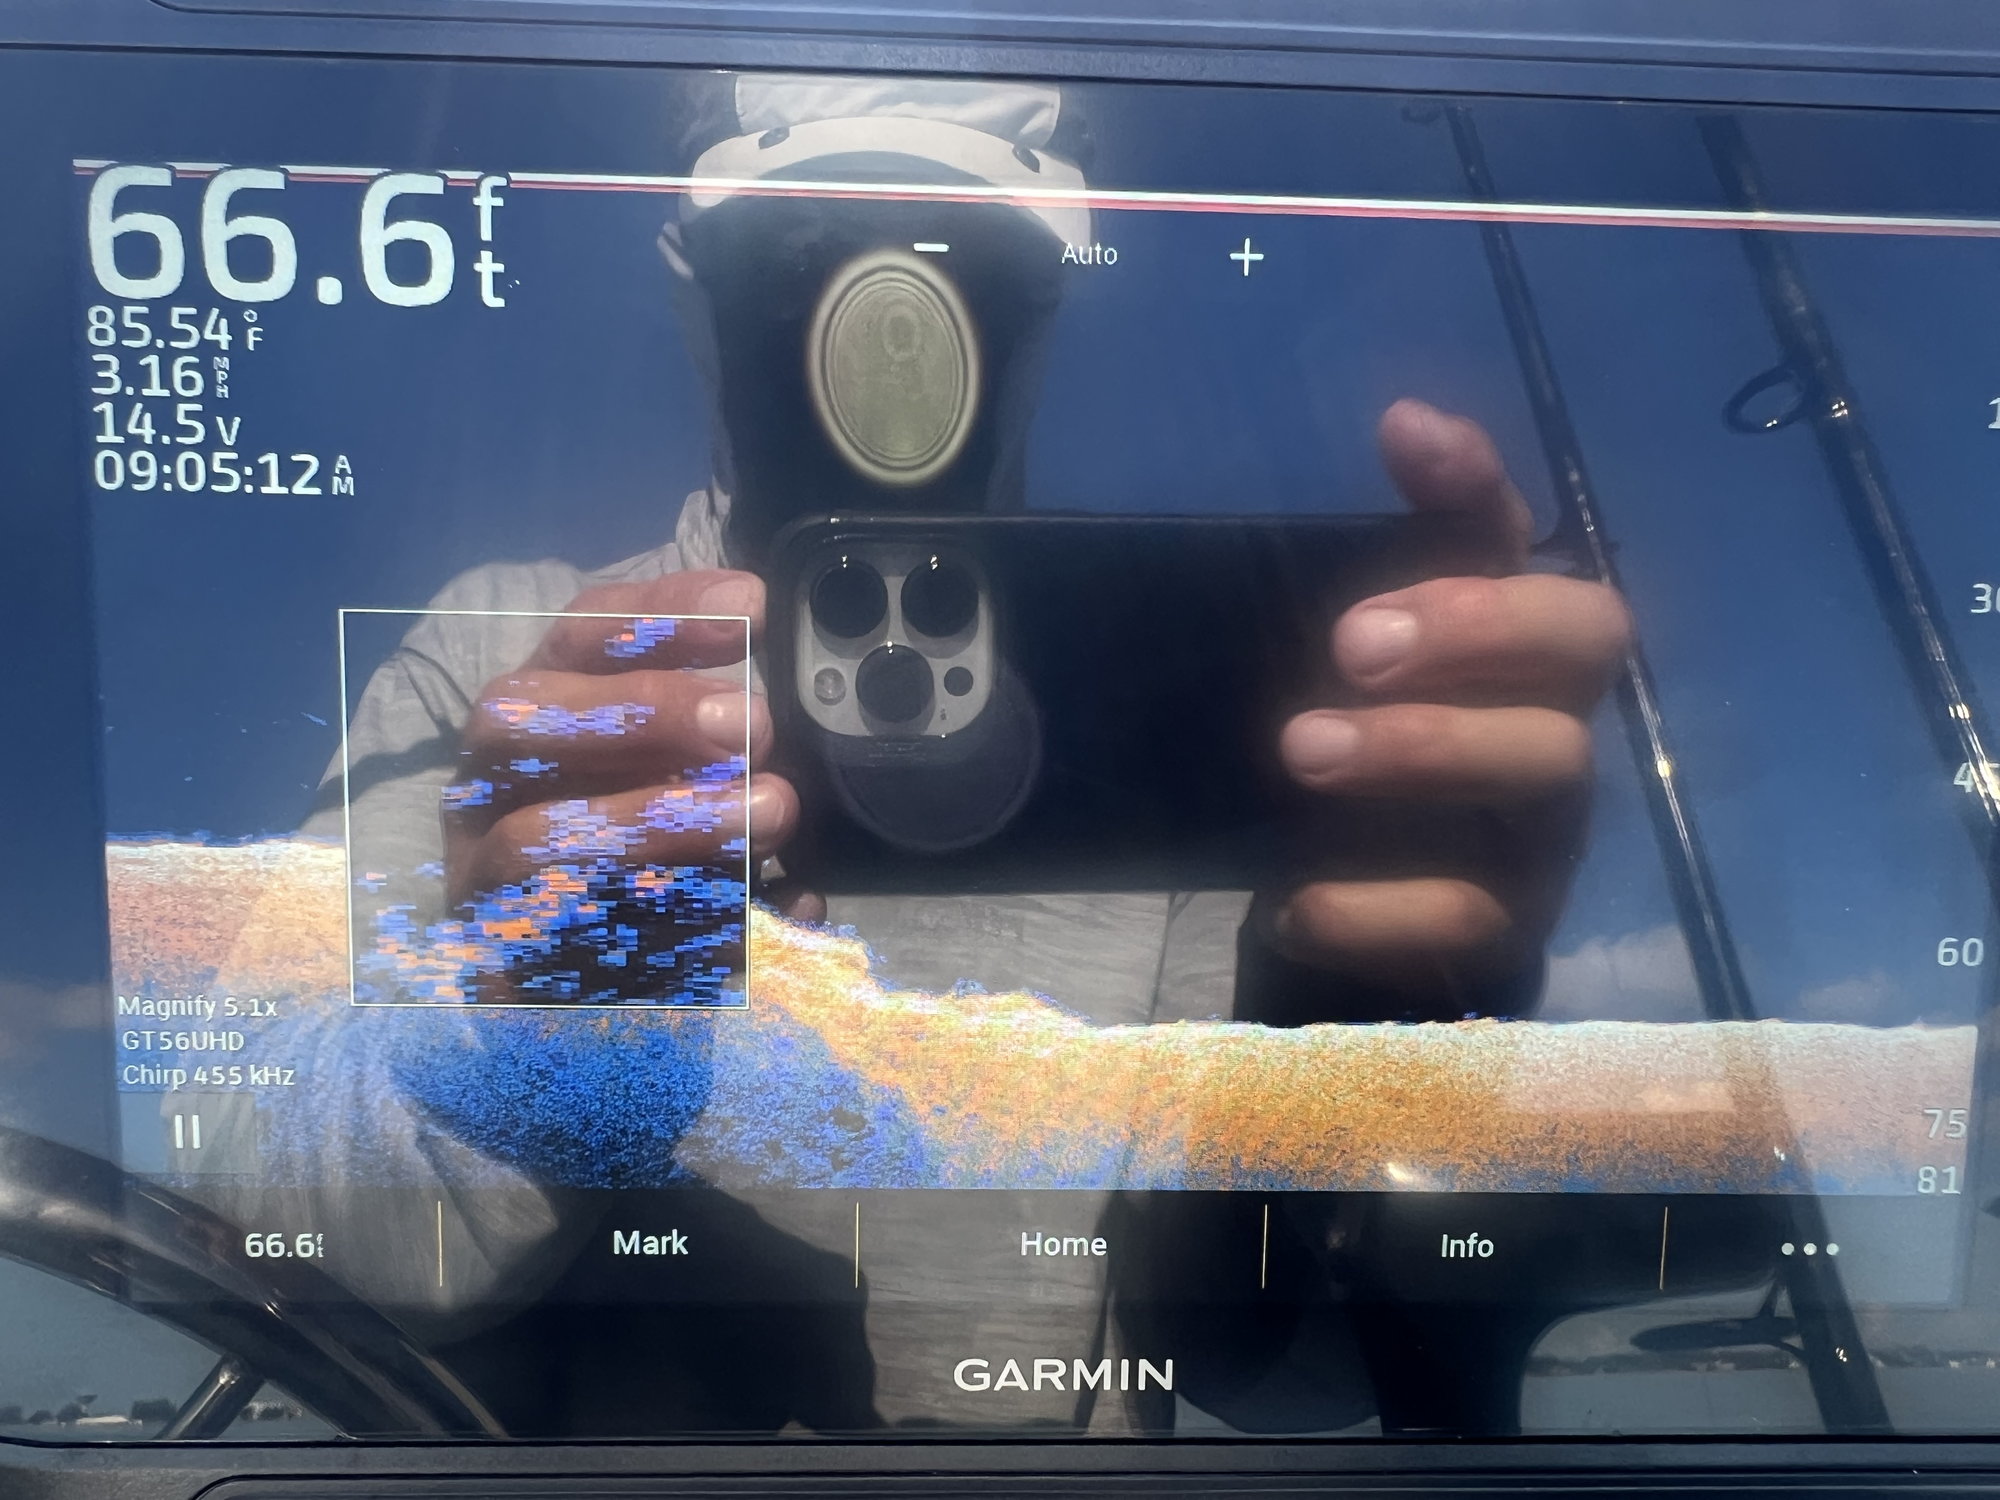 Garmin GT56UHD - saltwater and depth - Page 2 - The Hull Truth